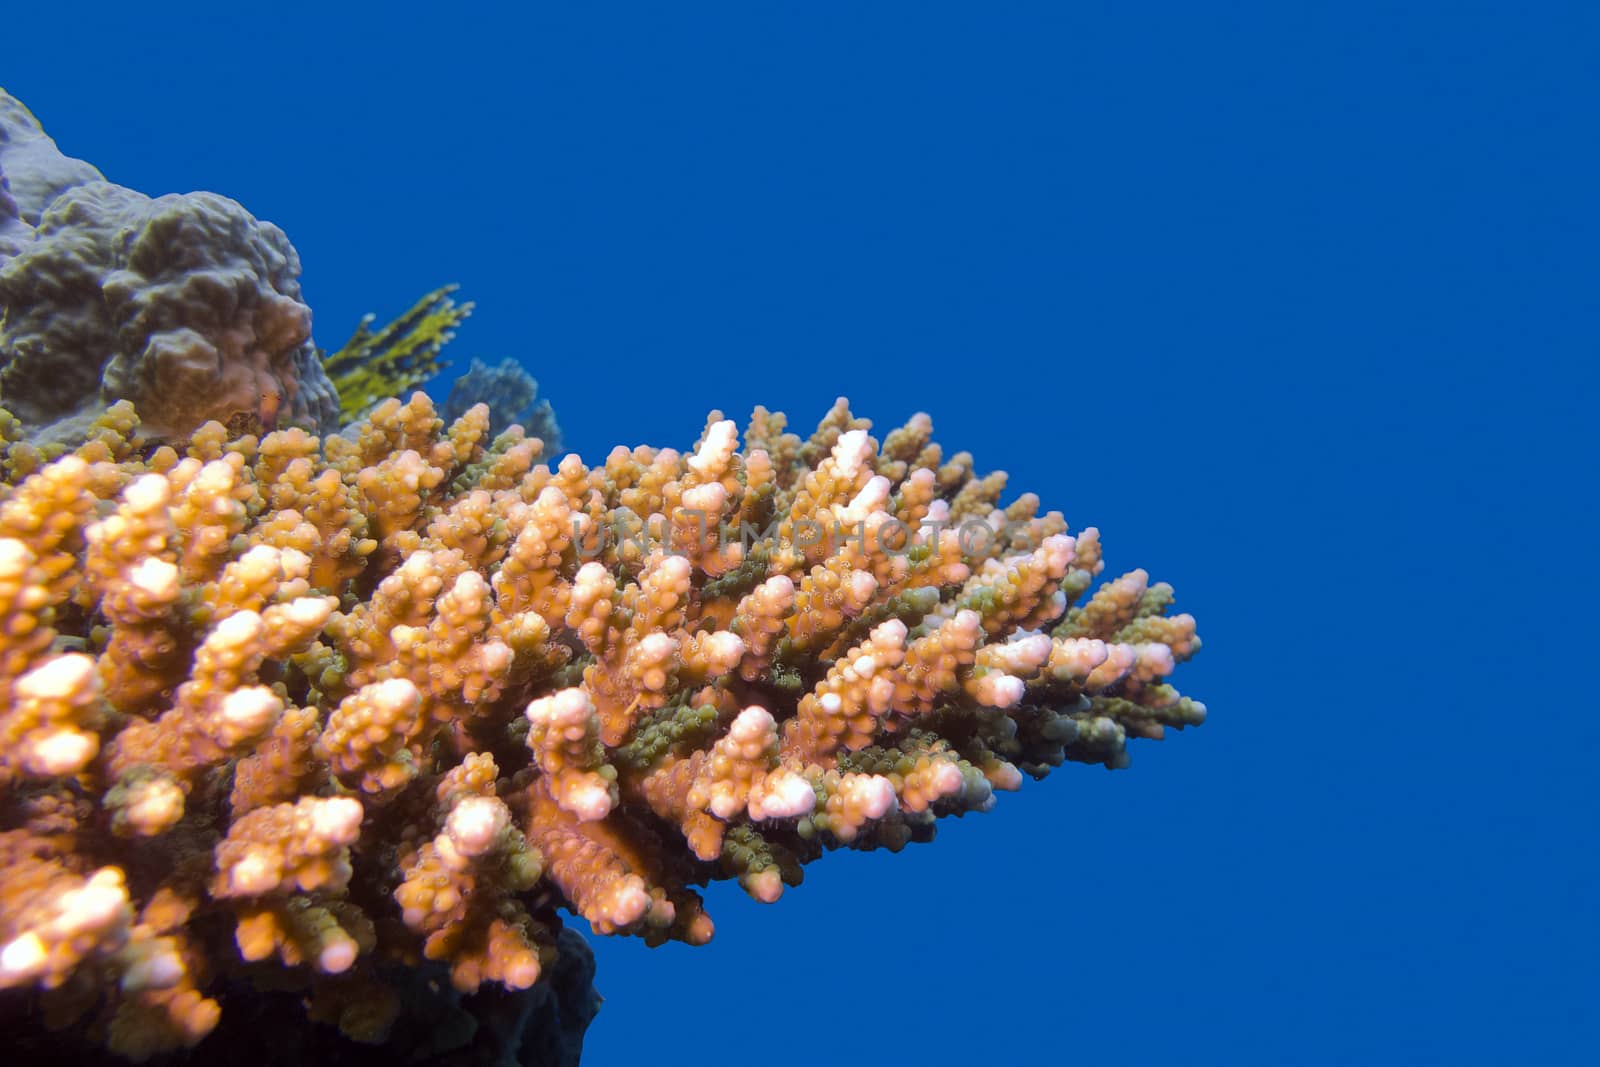 coral reef with hard acropora coral at the bottom of tropical sea on blue water background